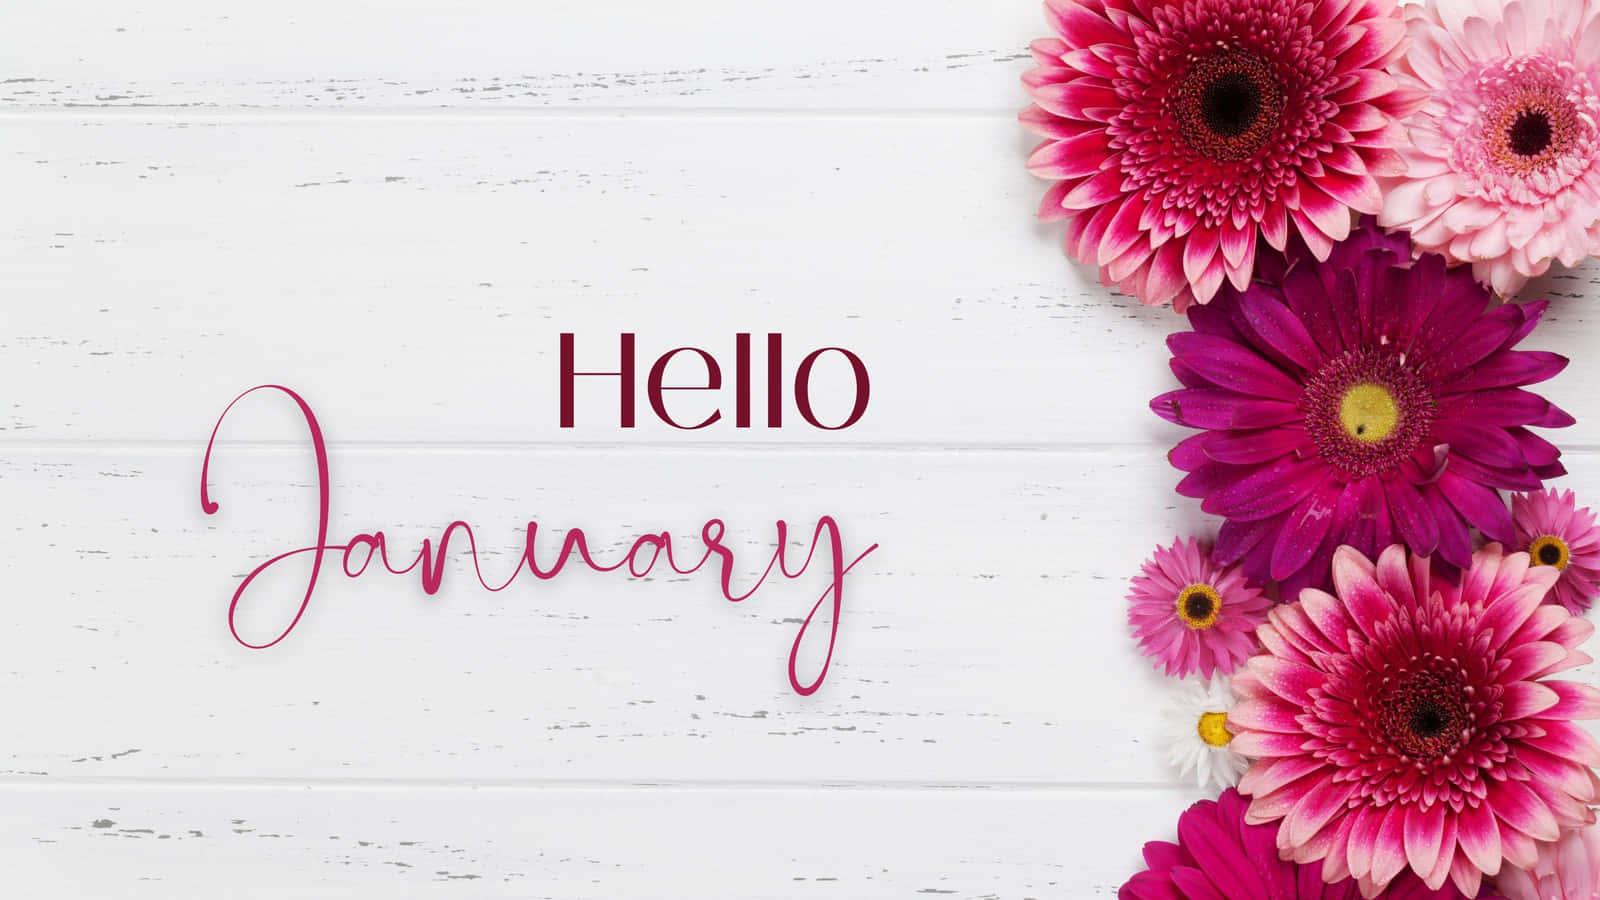 Hello January - Pink Flowers On A White Background Wallpaper